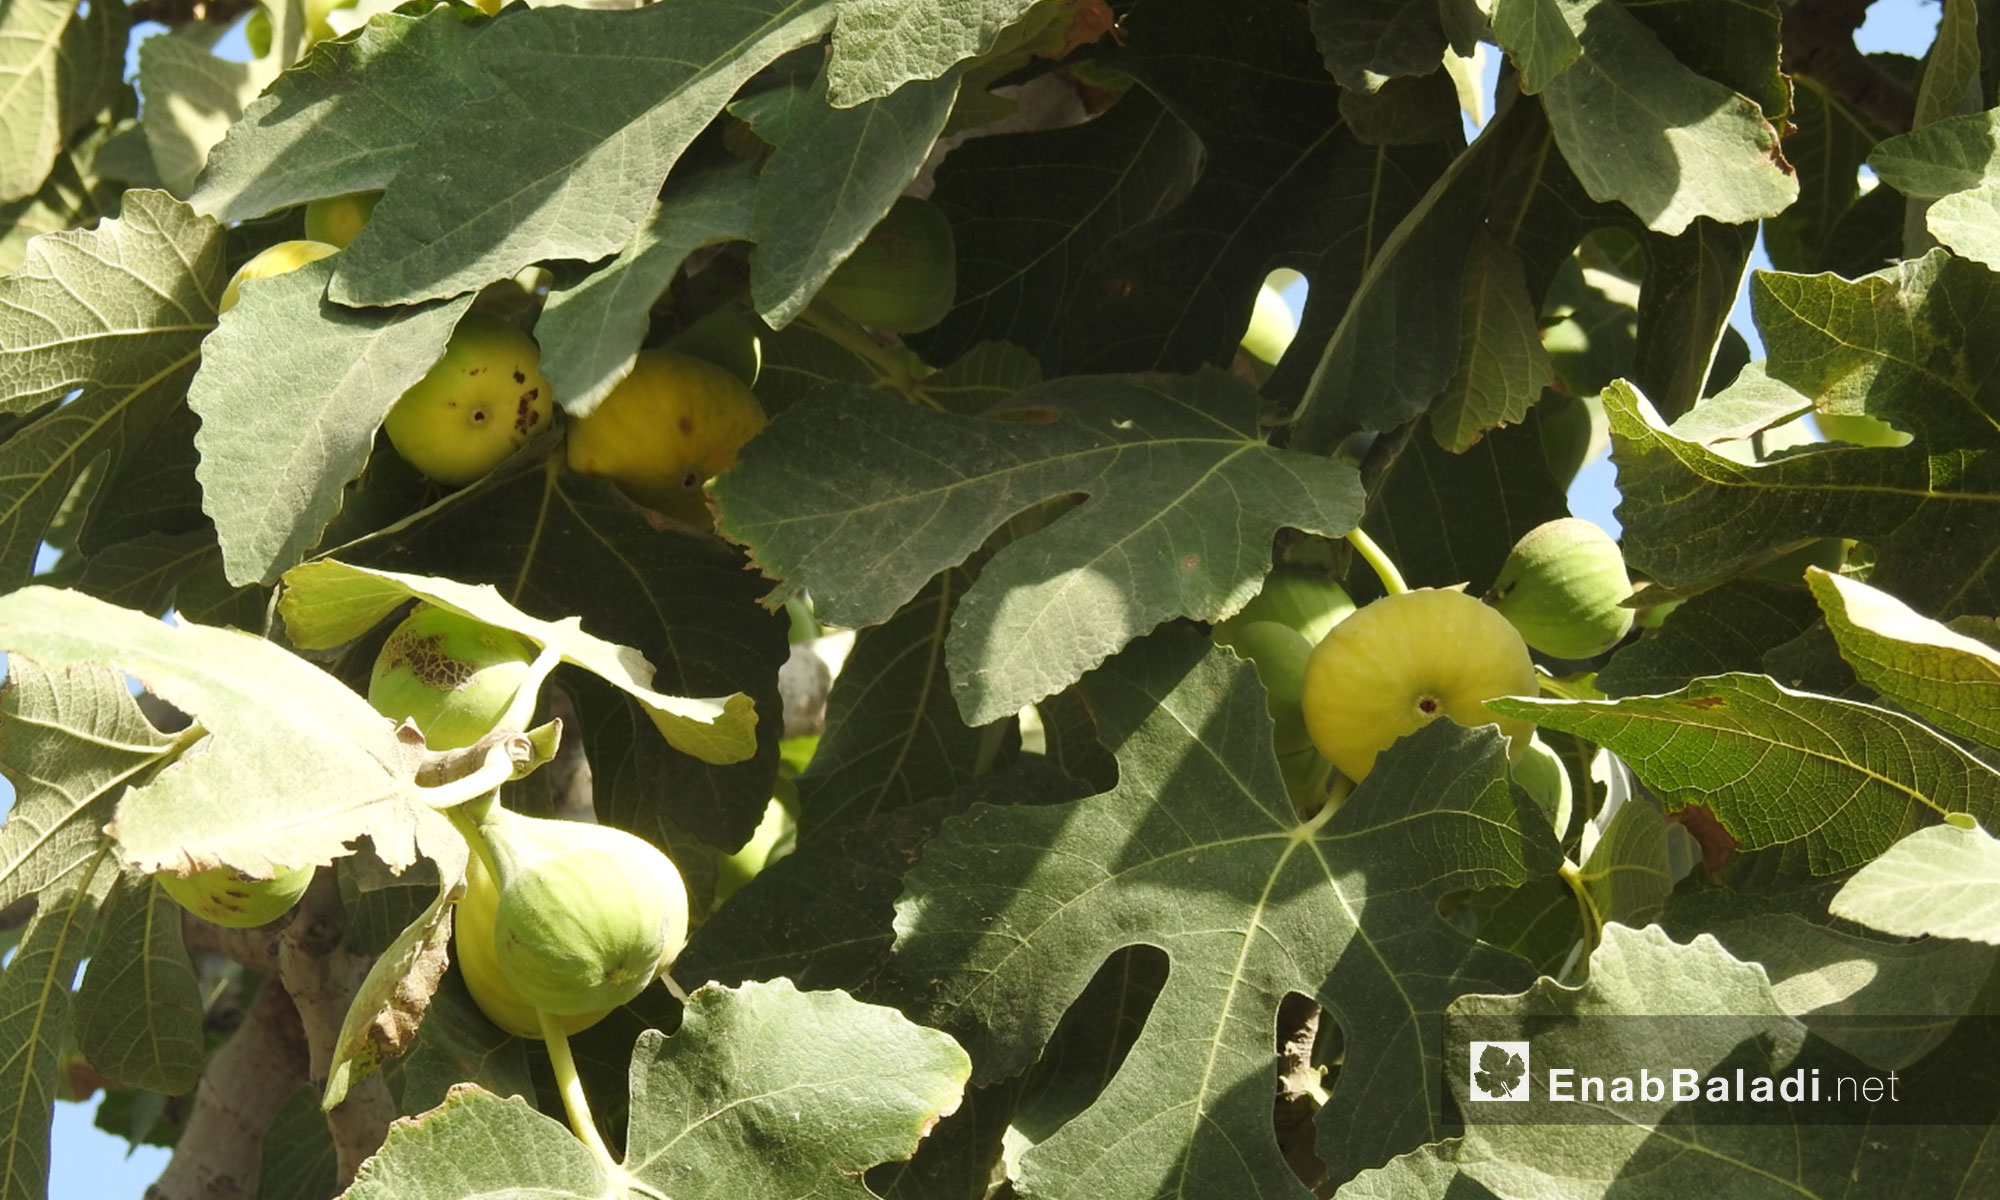 The figs season in the northern countryside of Aleppo – July 24, 2018 (Enab Baladi)